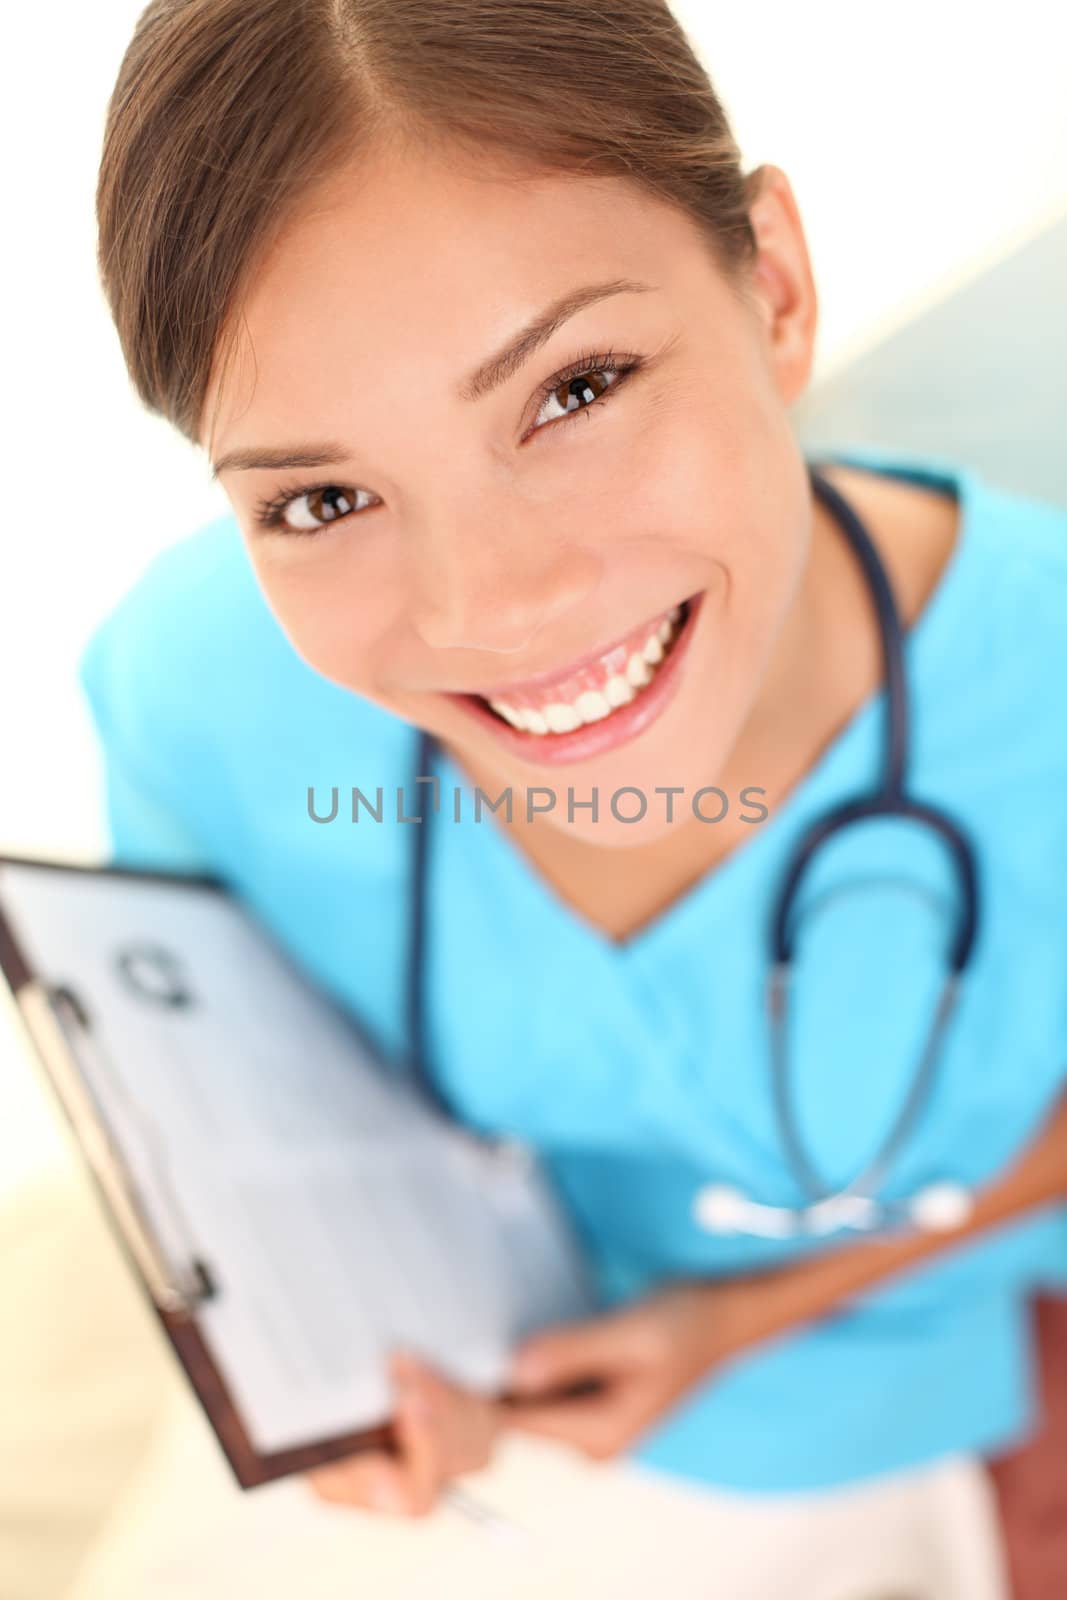 Nurse medical professional young doctor closeup portrait. Young multicultural female doctor wearing blue scrubs and stethoscope in high angle perspective view. Mixed race Asian Caucasian model.